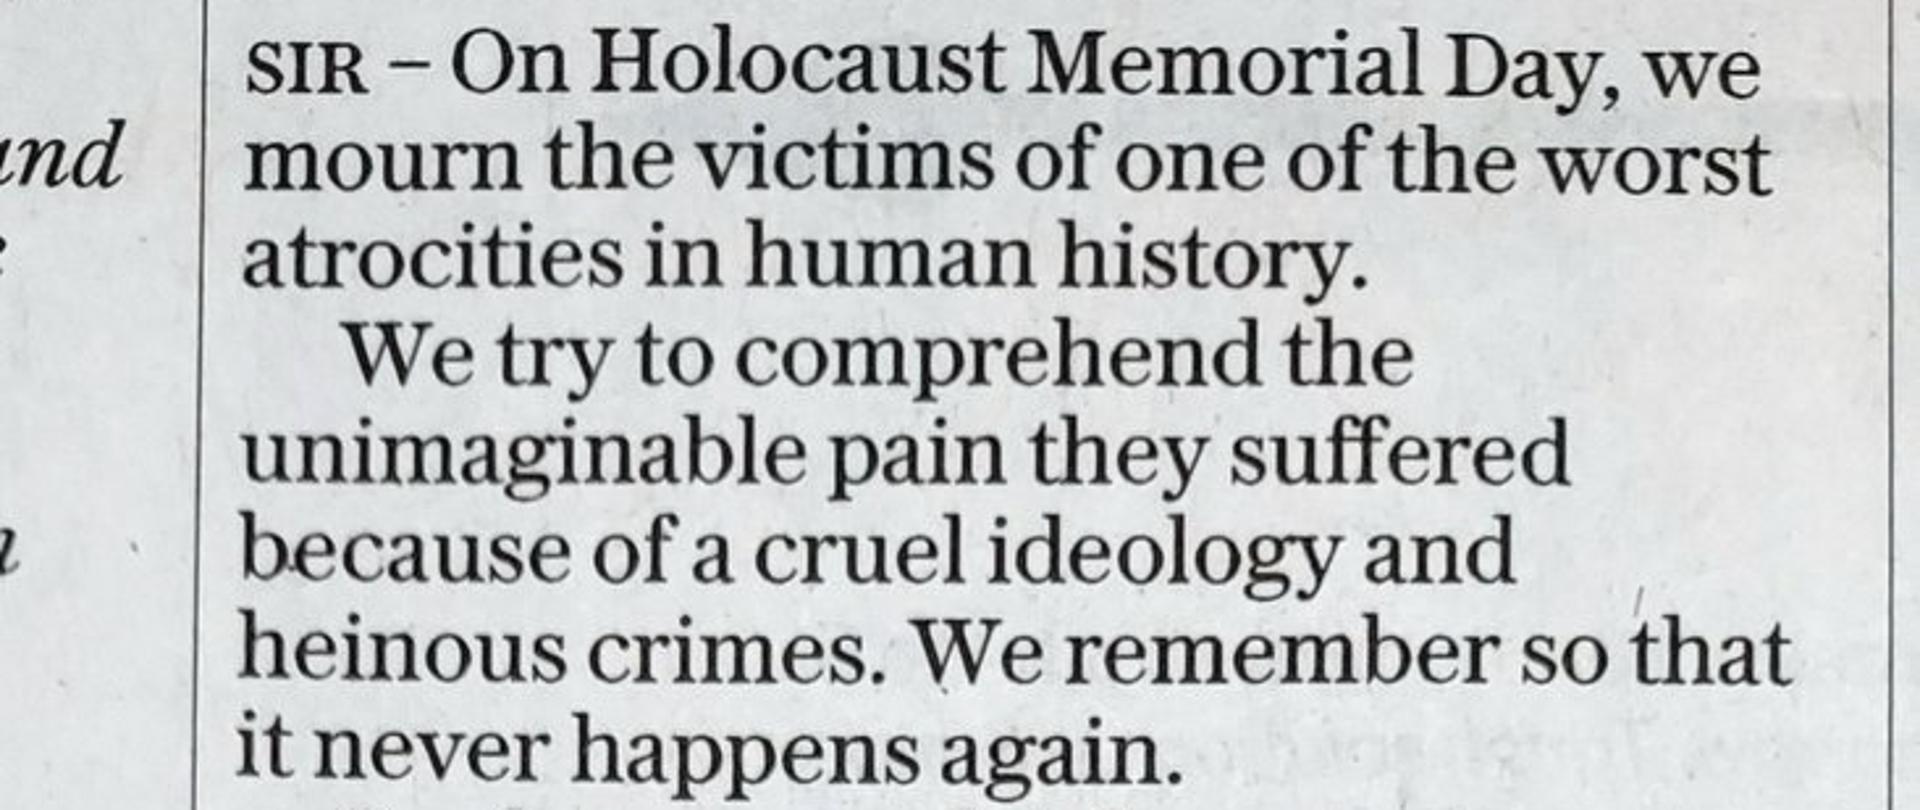 Ambassador Piotr Wilczek in The Daily Telegraph on Holocaust Memorial Day